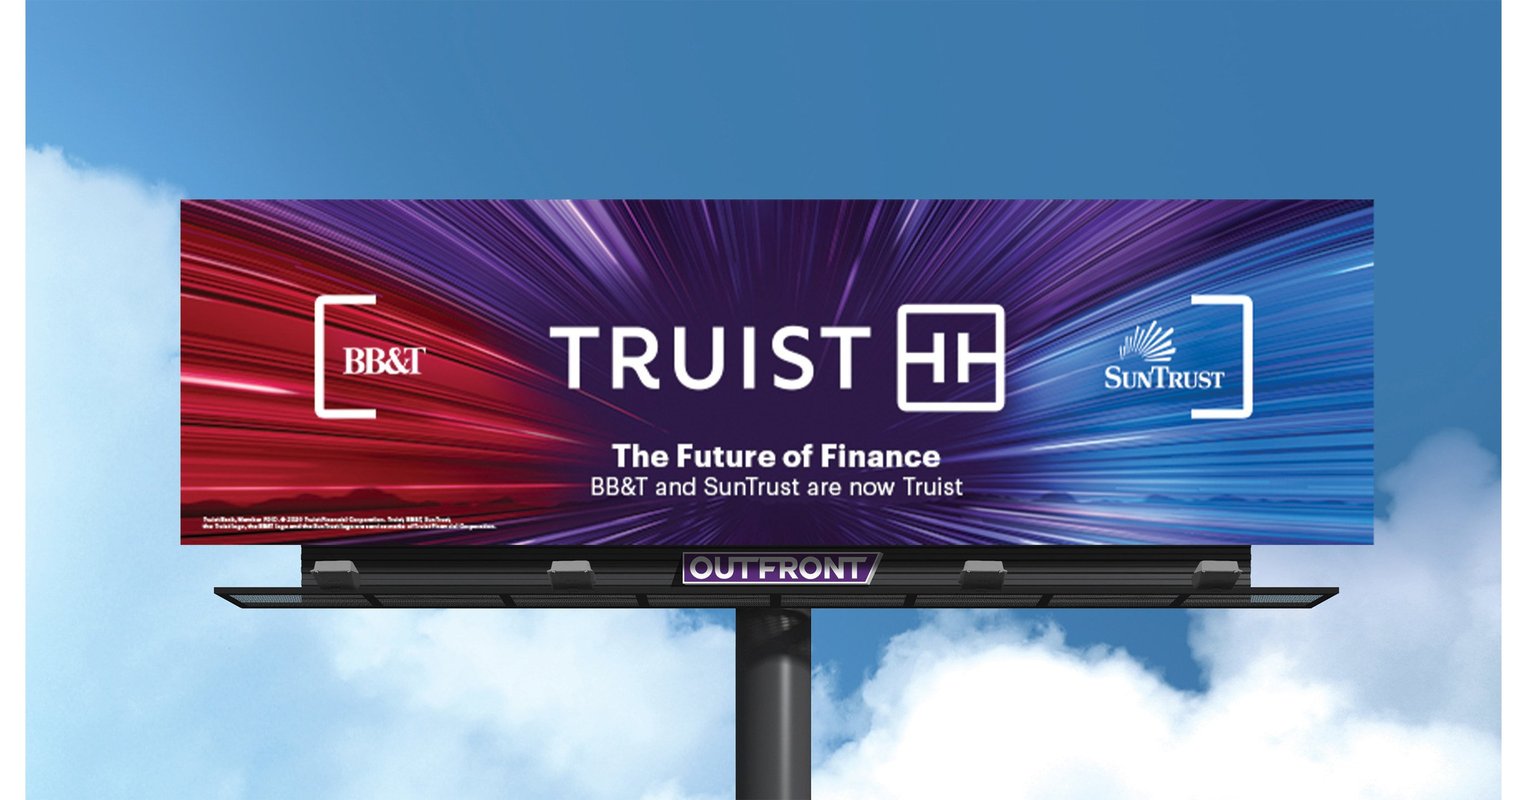 This image represents a billboard with a brightly coloured background and the corporate logo engraved on it.